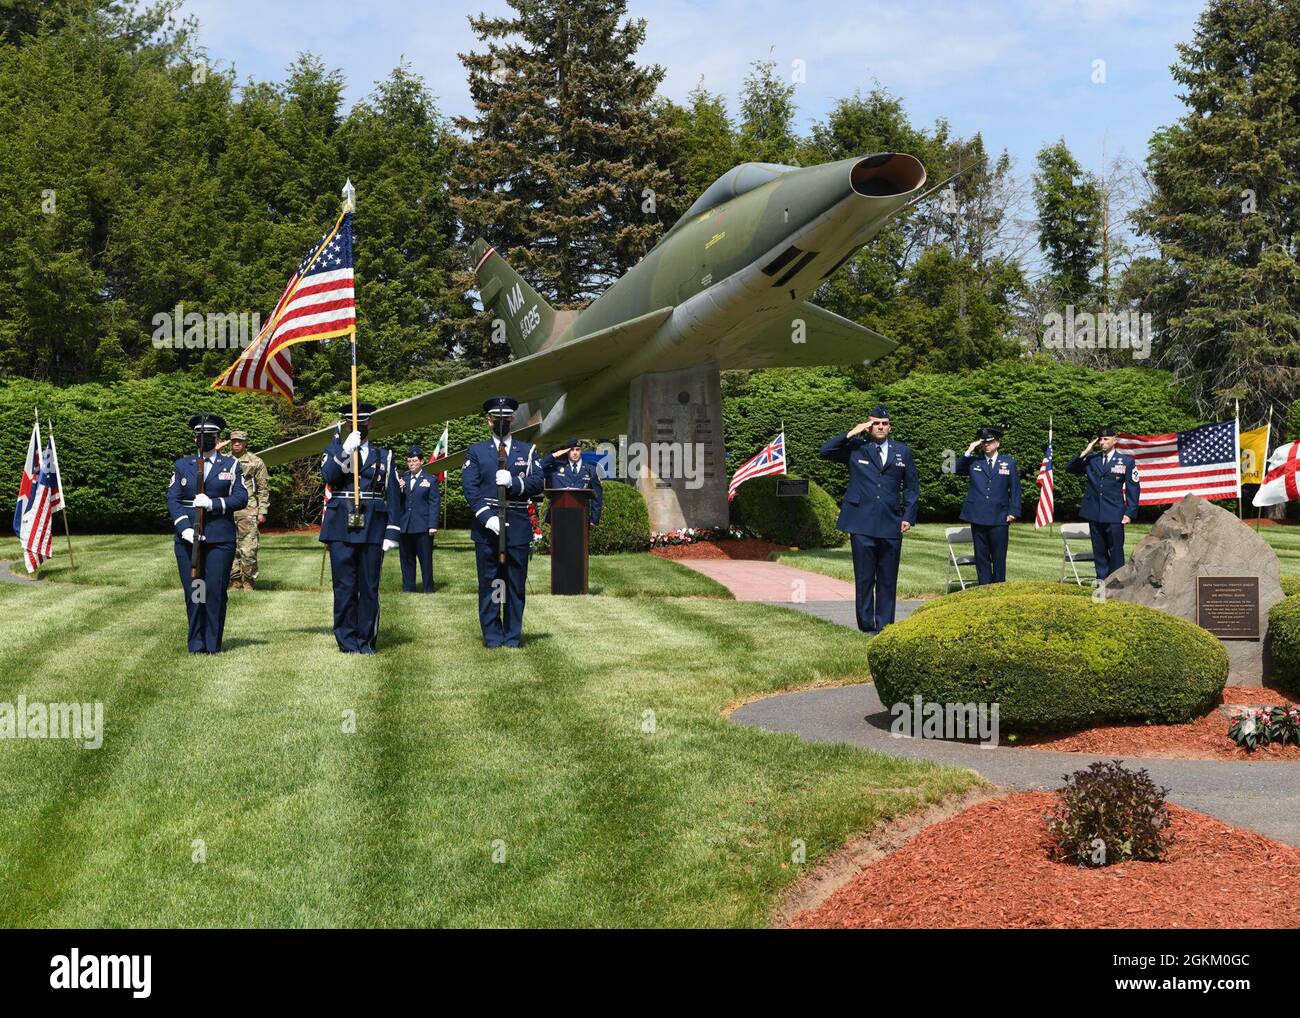 104th Fighter Wing Members Gather To Honor Their Brothers And Sisters In Arms Fallen In Flight During The Annual F 100 Memorial Rededication Ceremony May 21 21 At Barnes Air National Guard Base